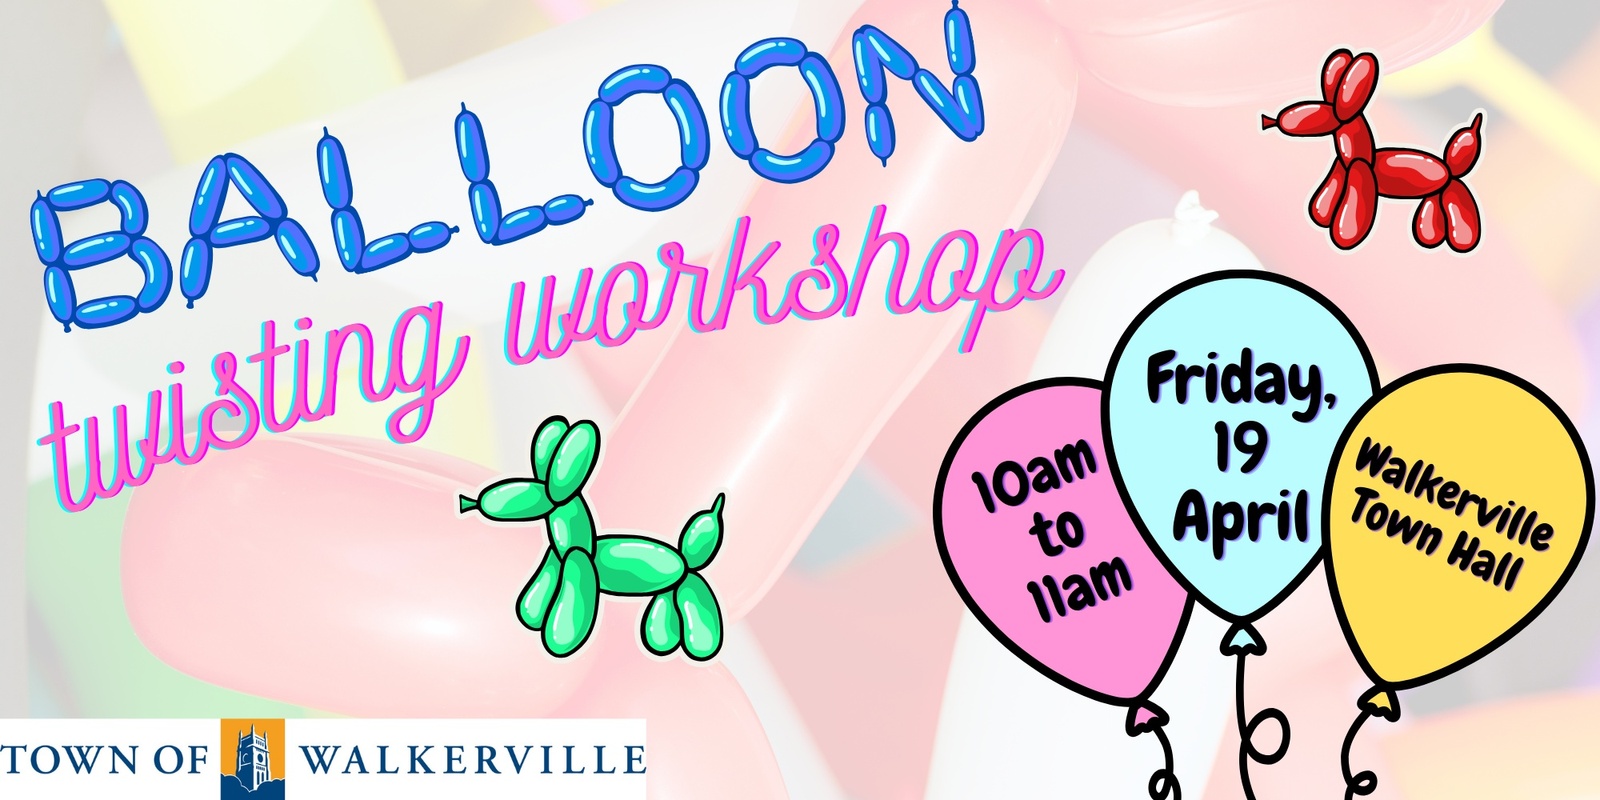 Banner image for Balloon twisting workshop 